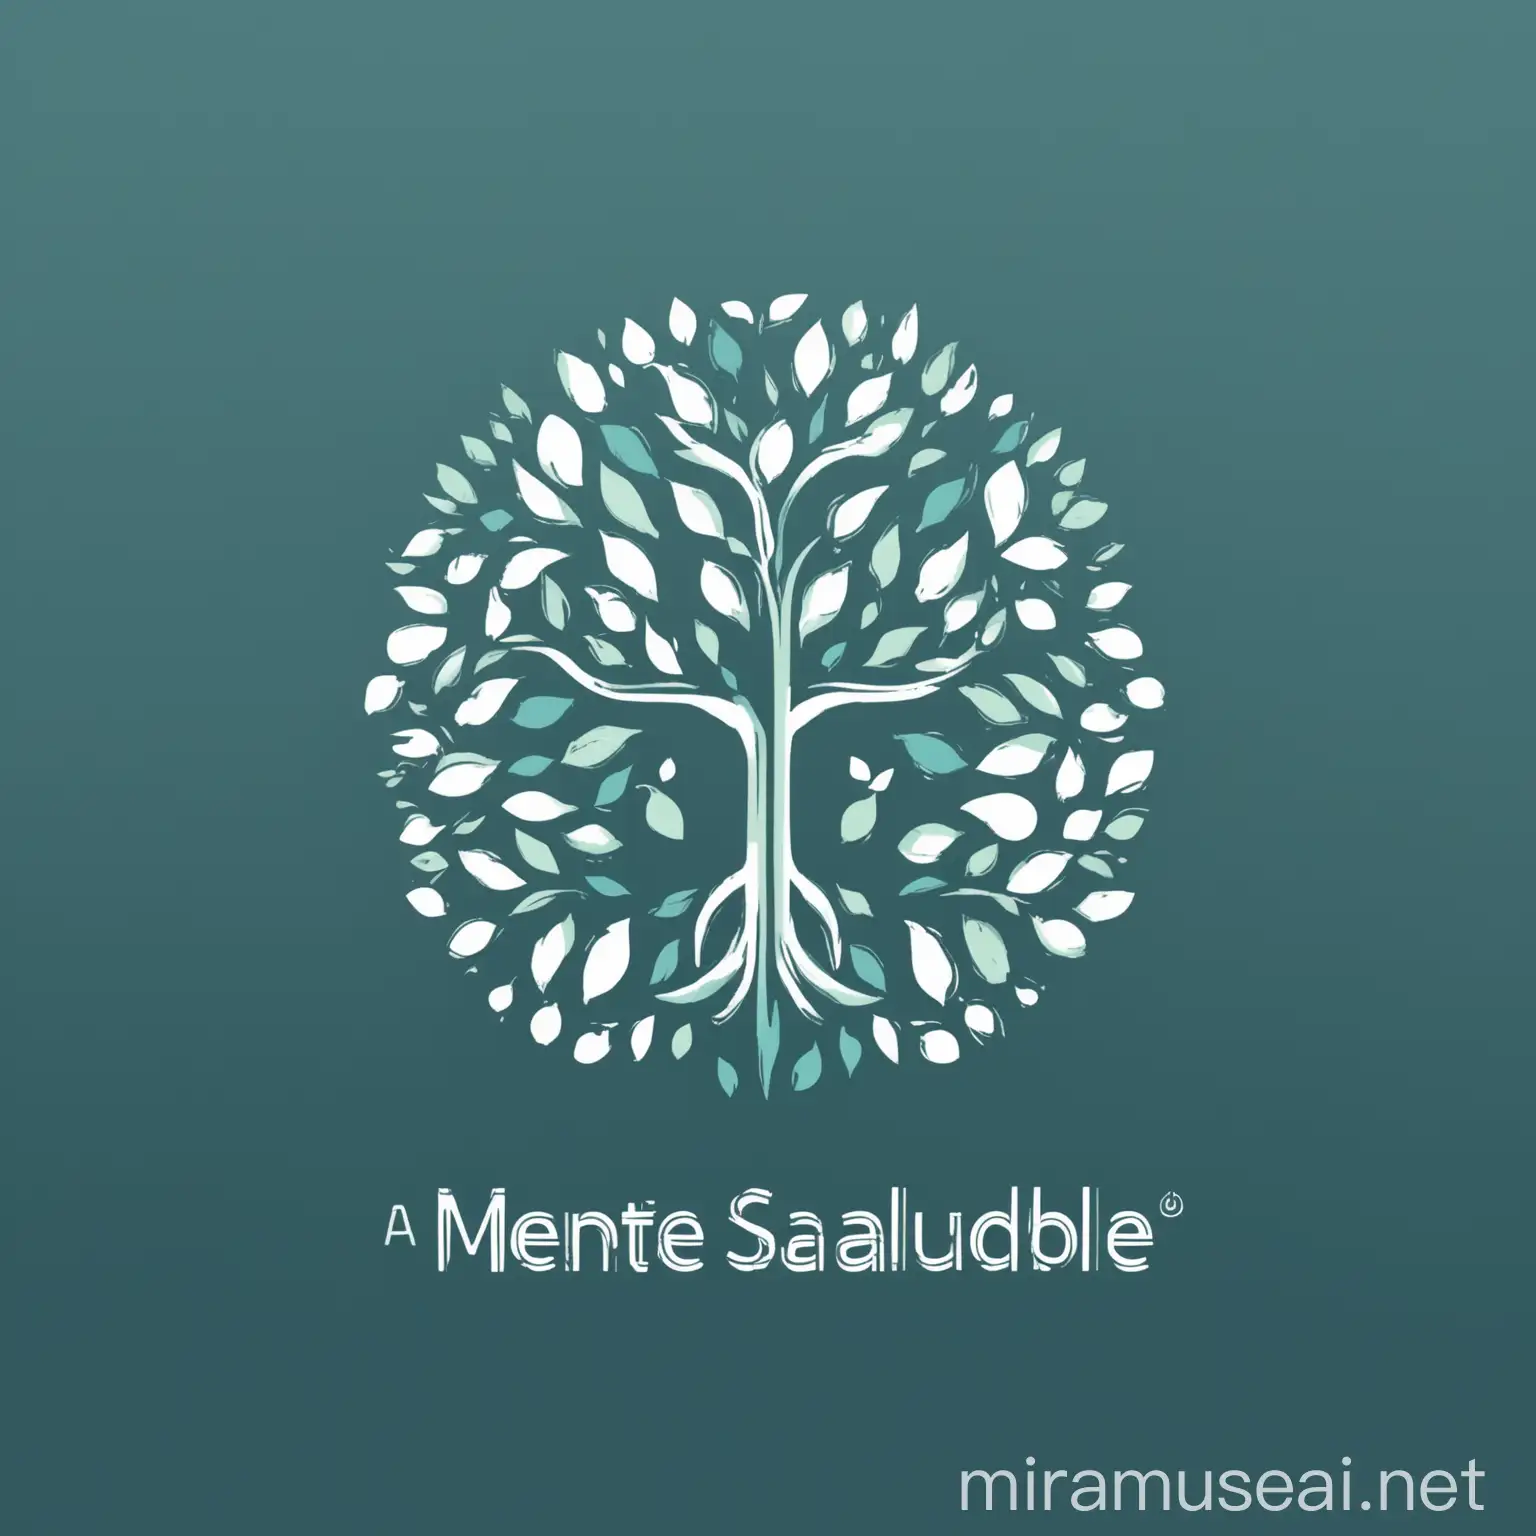 I need to design a logo for a psychological services company called "Mente Saludable". The concept that we want to convey is that of a modern, warm, and professional approach to mental health care. 

The logo should be minimalist, but at the same time attractive and memorable. Some elements that can be incorporated are:

- Use of a palette of relaxing and harmonious colors, such as soft blues, greens, or lilacs.
- Incorporation of soft and rounded shapes that convey serenity.
- Inclusion of a symbol or icon representing the mind, brain, or the concept of psychological well-being in a subtle and elegant way.
- Use of clean, readable typography with a modern touch.

The logo should be versatile and work well both in digital applications and in print. Additionally, it should be easily scalable and recognizable even in small sizes.

In summary, we aim to create an attractive, memorable logo that reflects the values of professionalism, warmth, and care for mental health offered by the company "Mente Saludable".